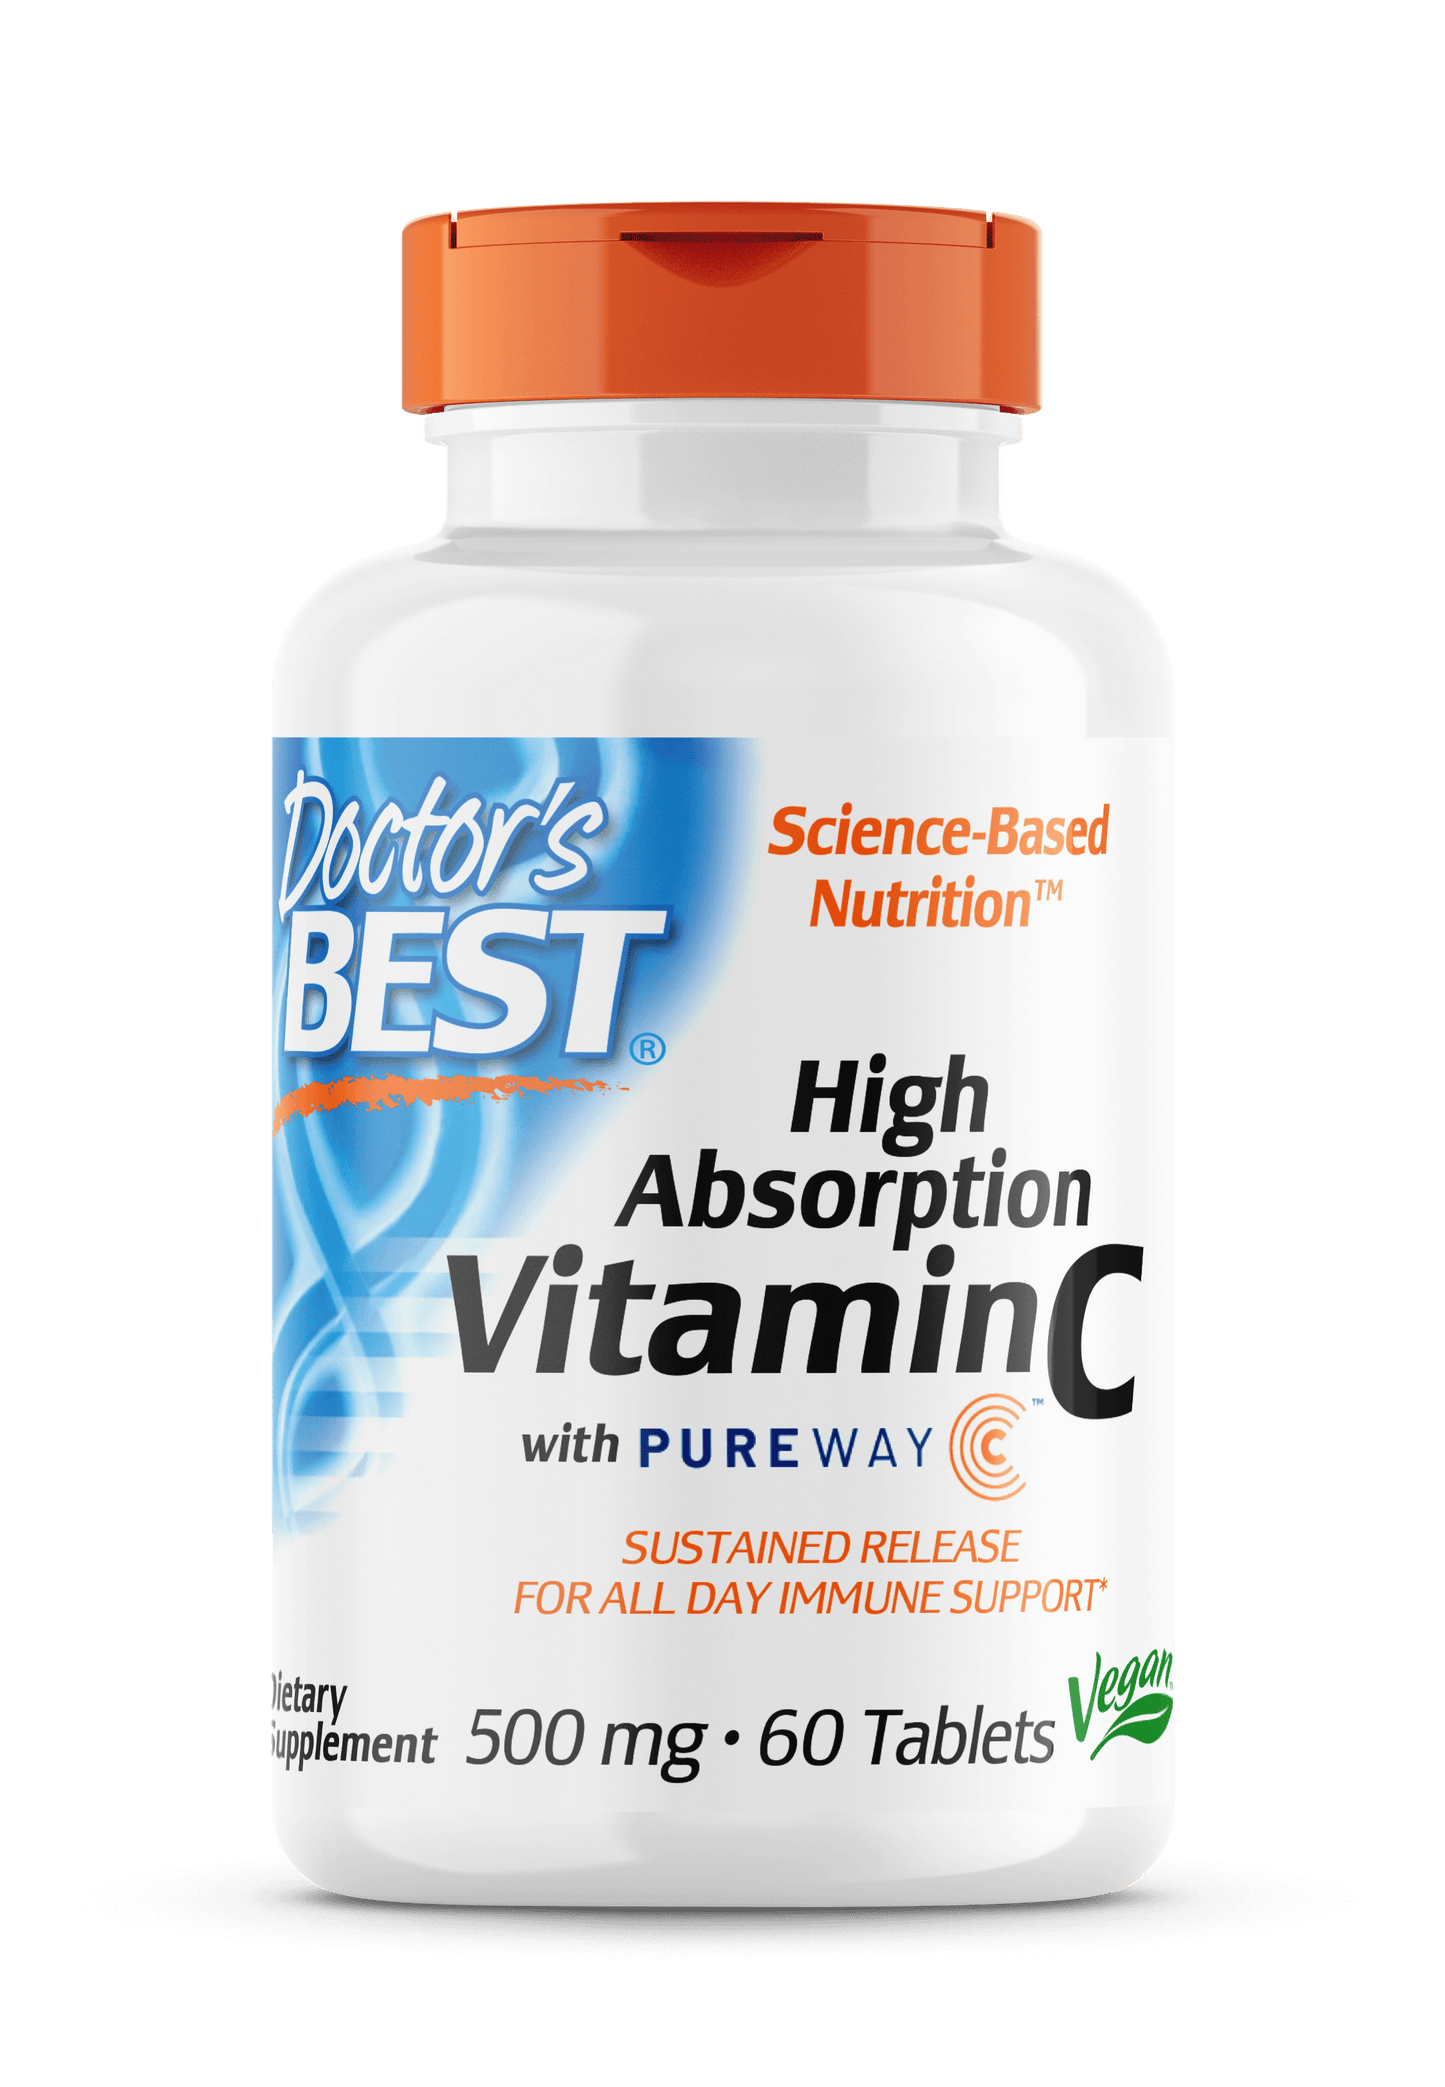 Doctor's Best Vitamin C with Pureway-C 60 Tablets